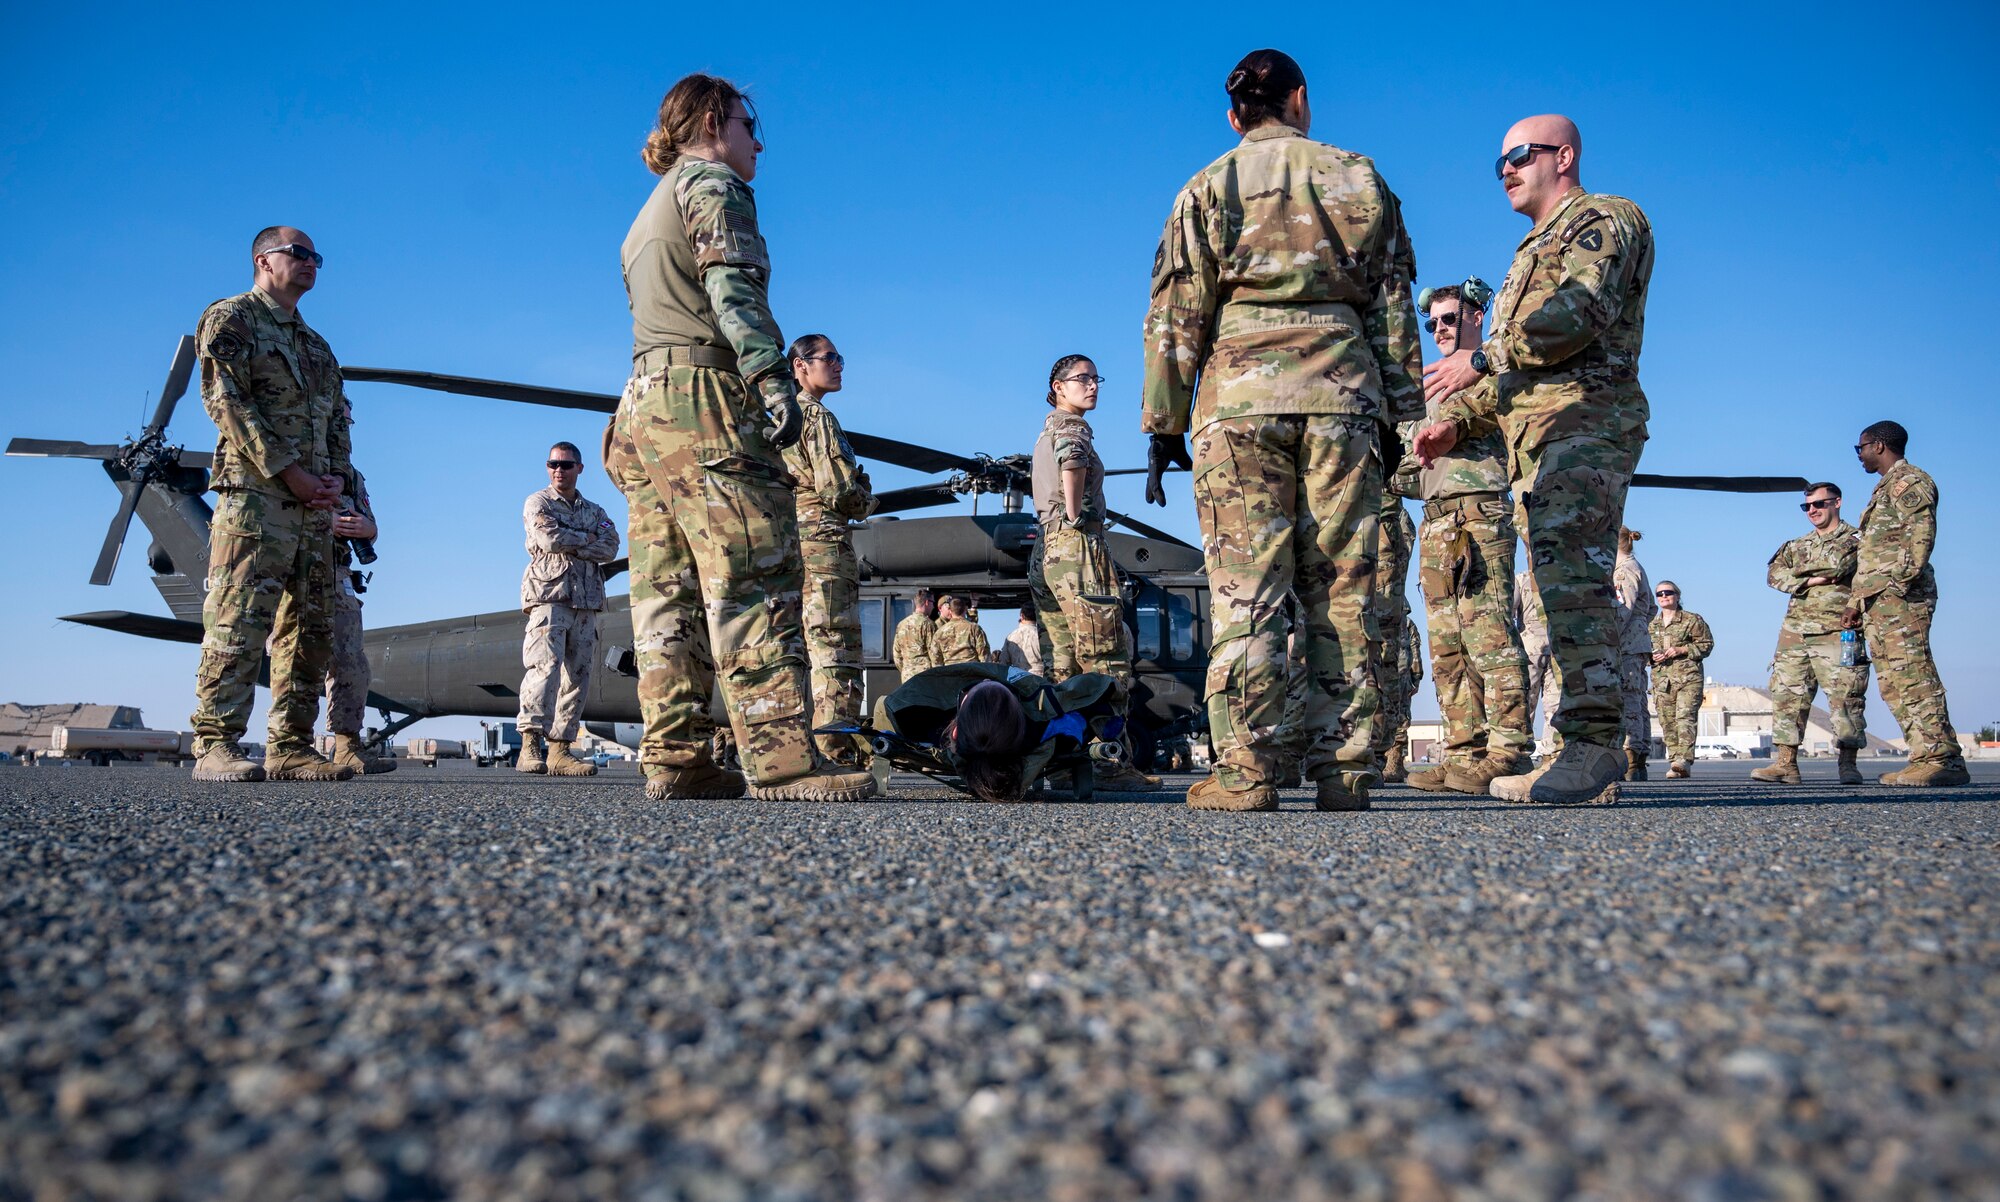 U.S. Air Force Airmen, U.S. Army Soldiers, and Canadian and Norwegian coalition partners train on how to load and unload injured patients from a UH-60 Blackhawk helicopter at Ali Al Salem Air Base, Kuwait, Jan. 20, 2023.